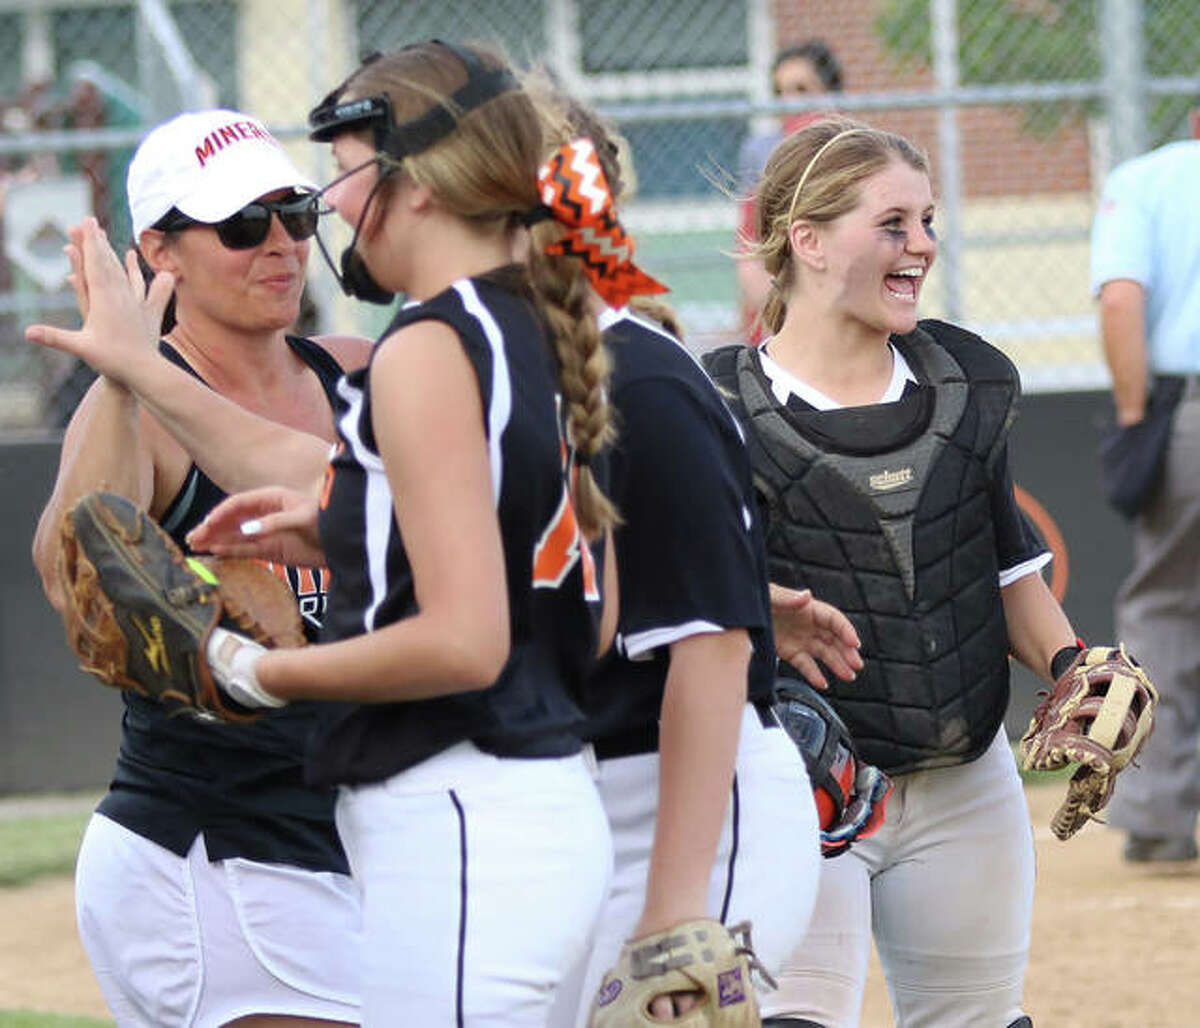 Gillespie catcher Hannah Barrett (right) waits for pitcher Sydney Bires to join the celebration while Miners coach Michelle Smith welcomes players off the field after a 4-1 win over Southwestern on Monday in Gillespie.